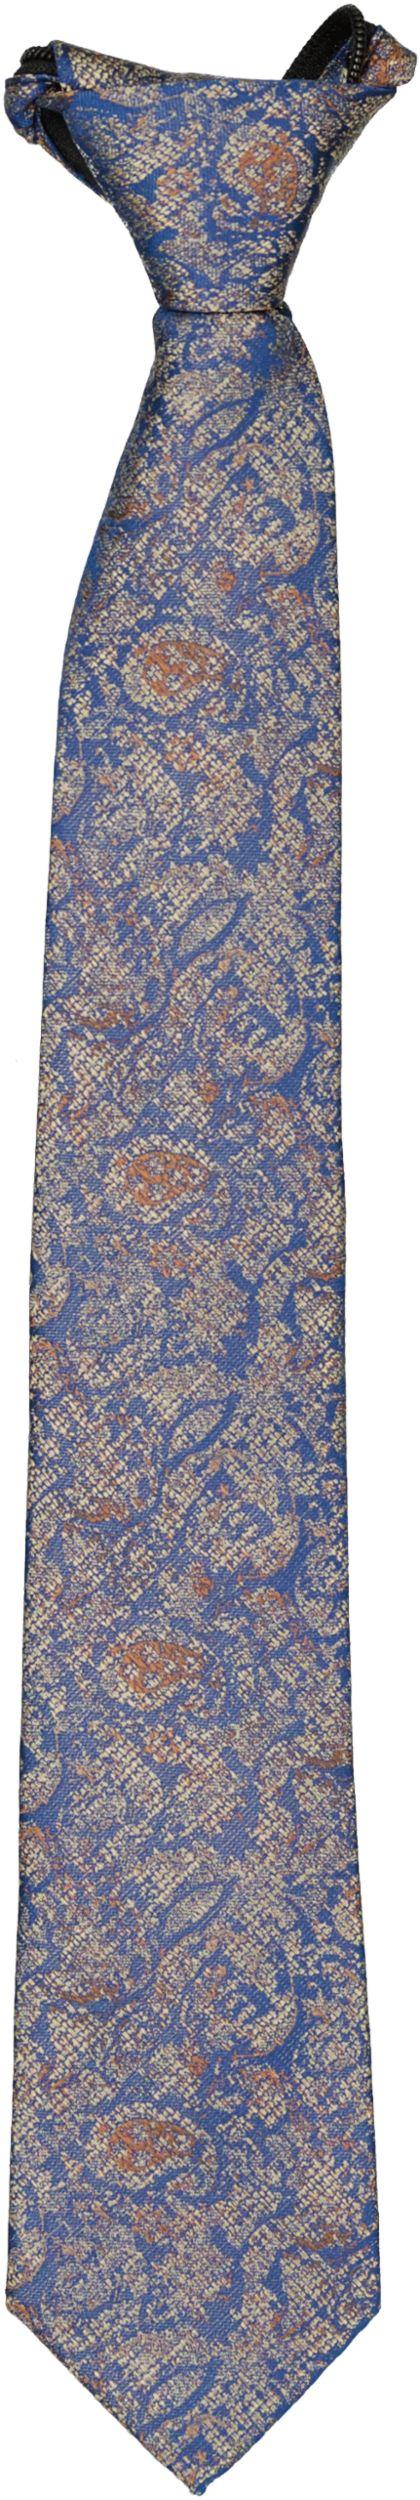 T.O. Collection Mens Necktie - TO248